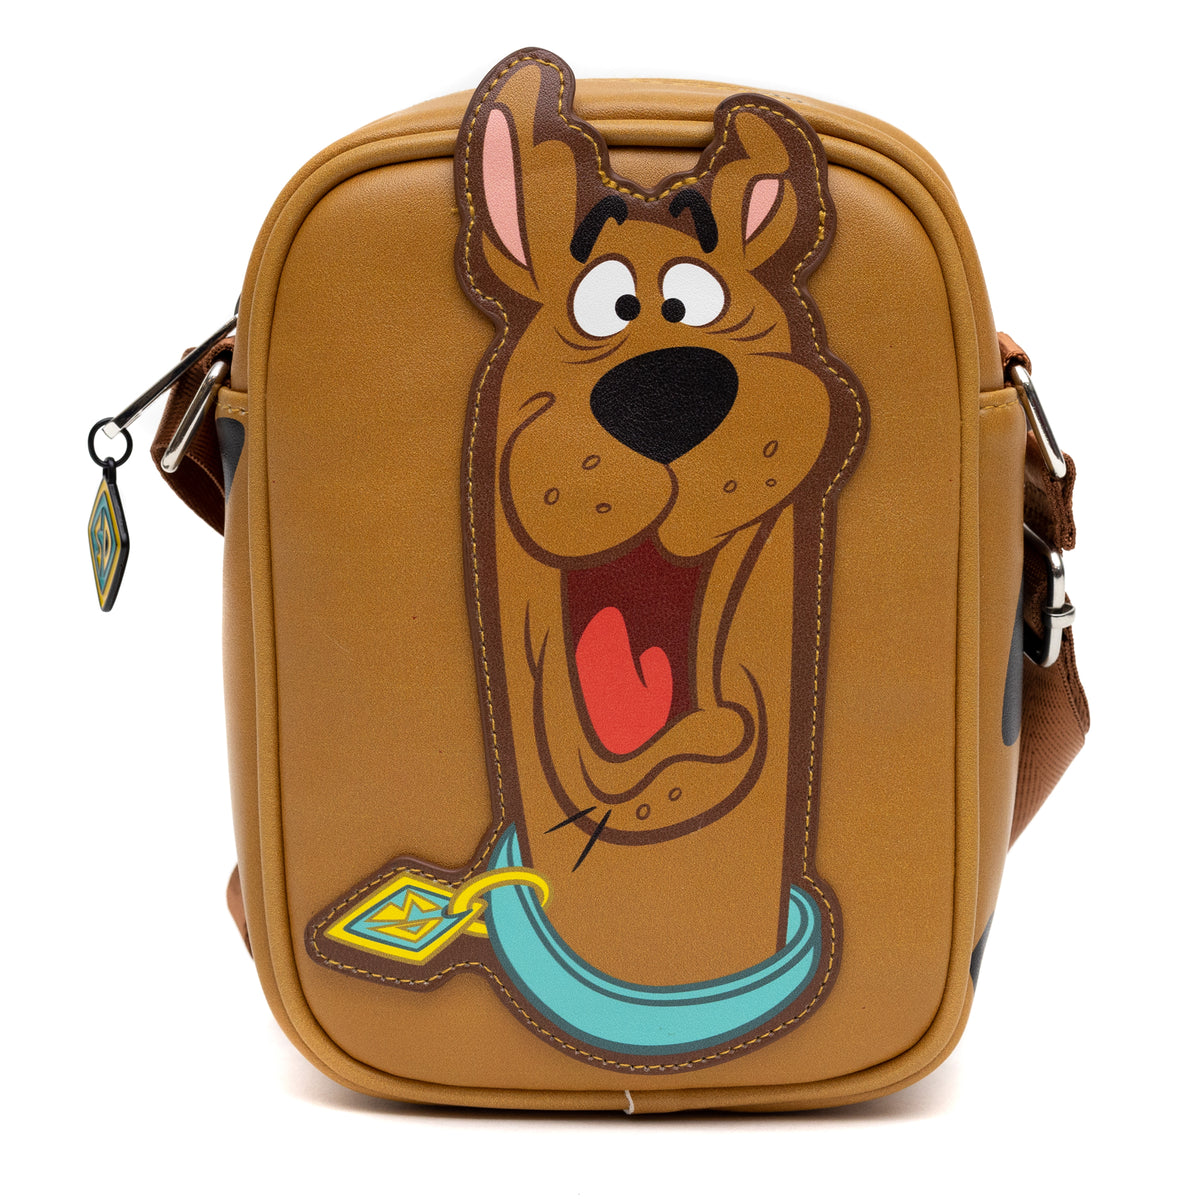 Scooby Doo Gift Bags Scooby Doo Favor Bags Scooby Goody Bags - Etsy |  Scooby doo birthday party, Scooby doo decorations, Scooby doo halloween  party